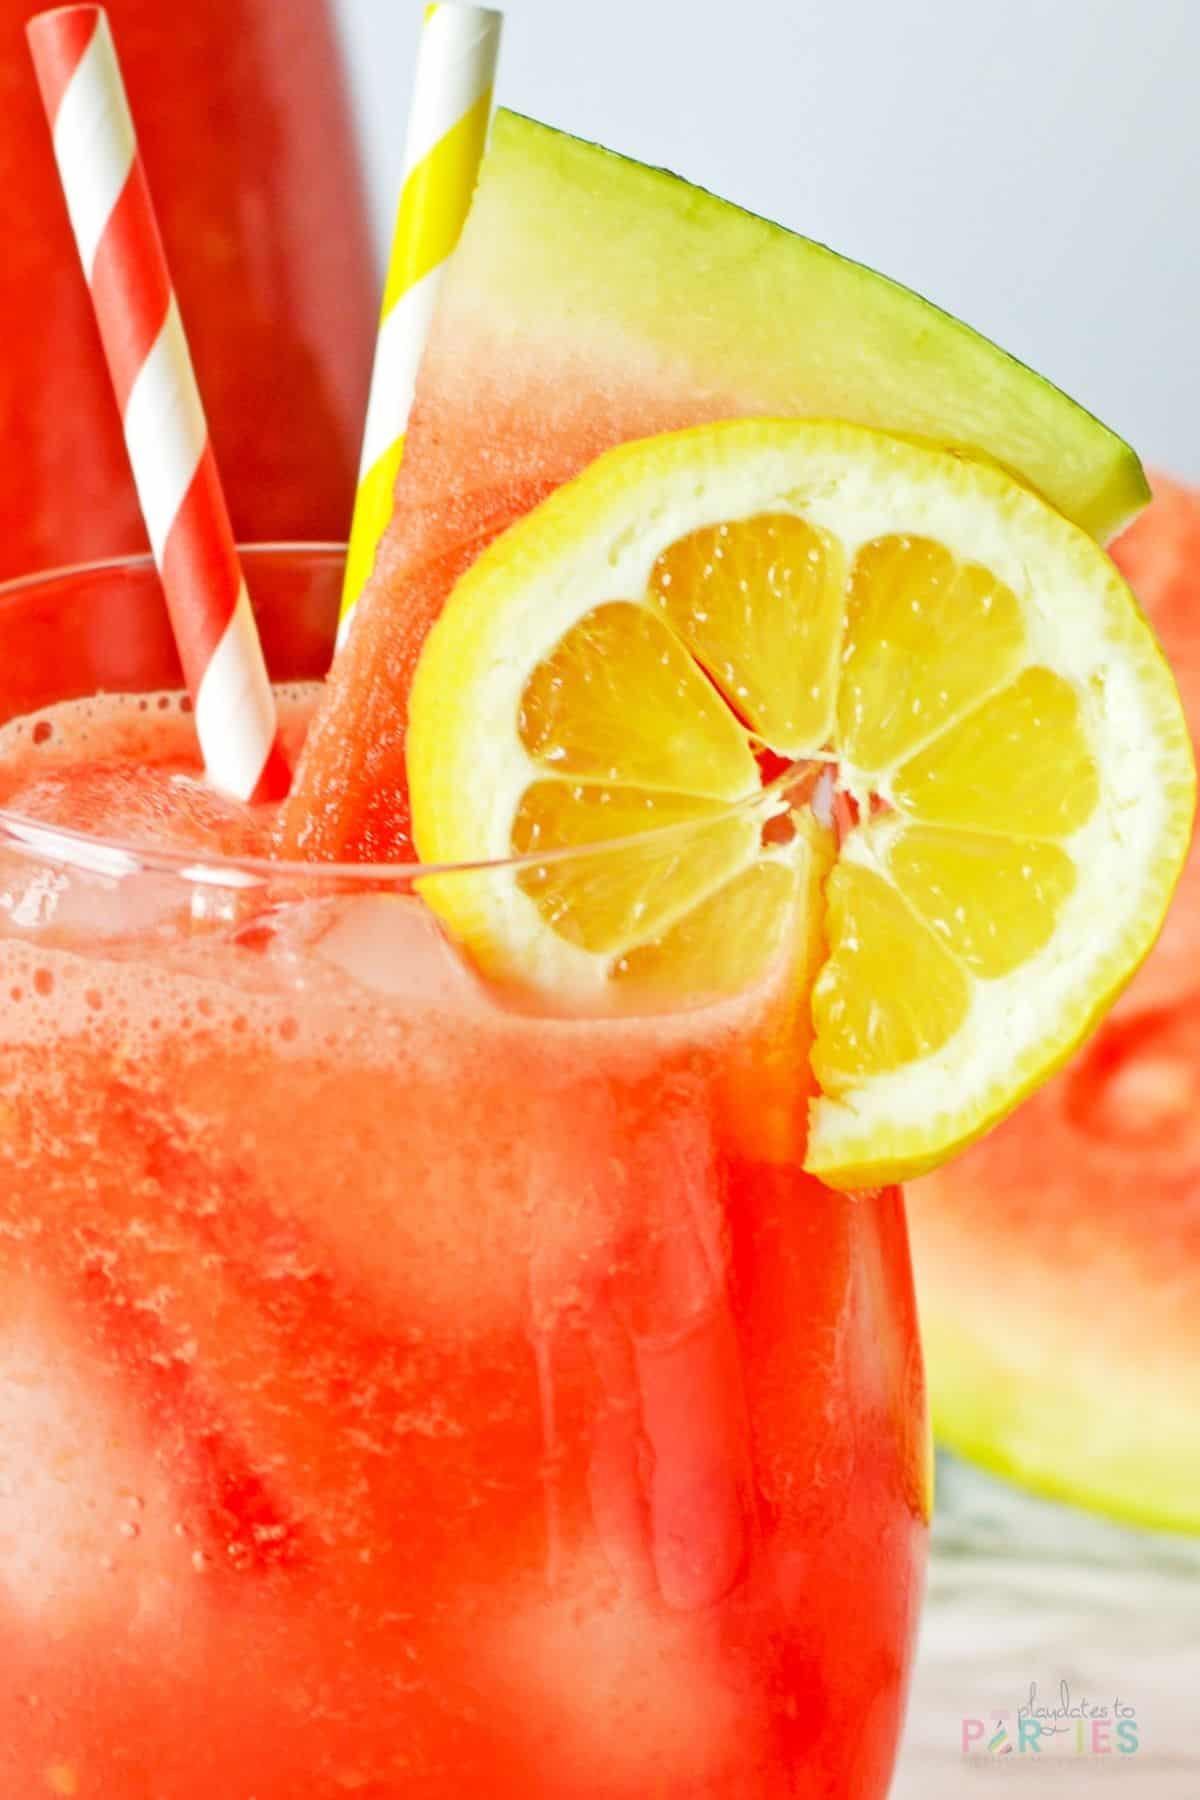 Close up image of a cup of watermelon lemonade with a slice of lemon and a wedge of watermelon.